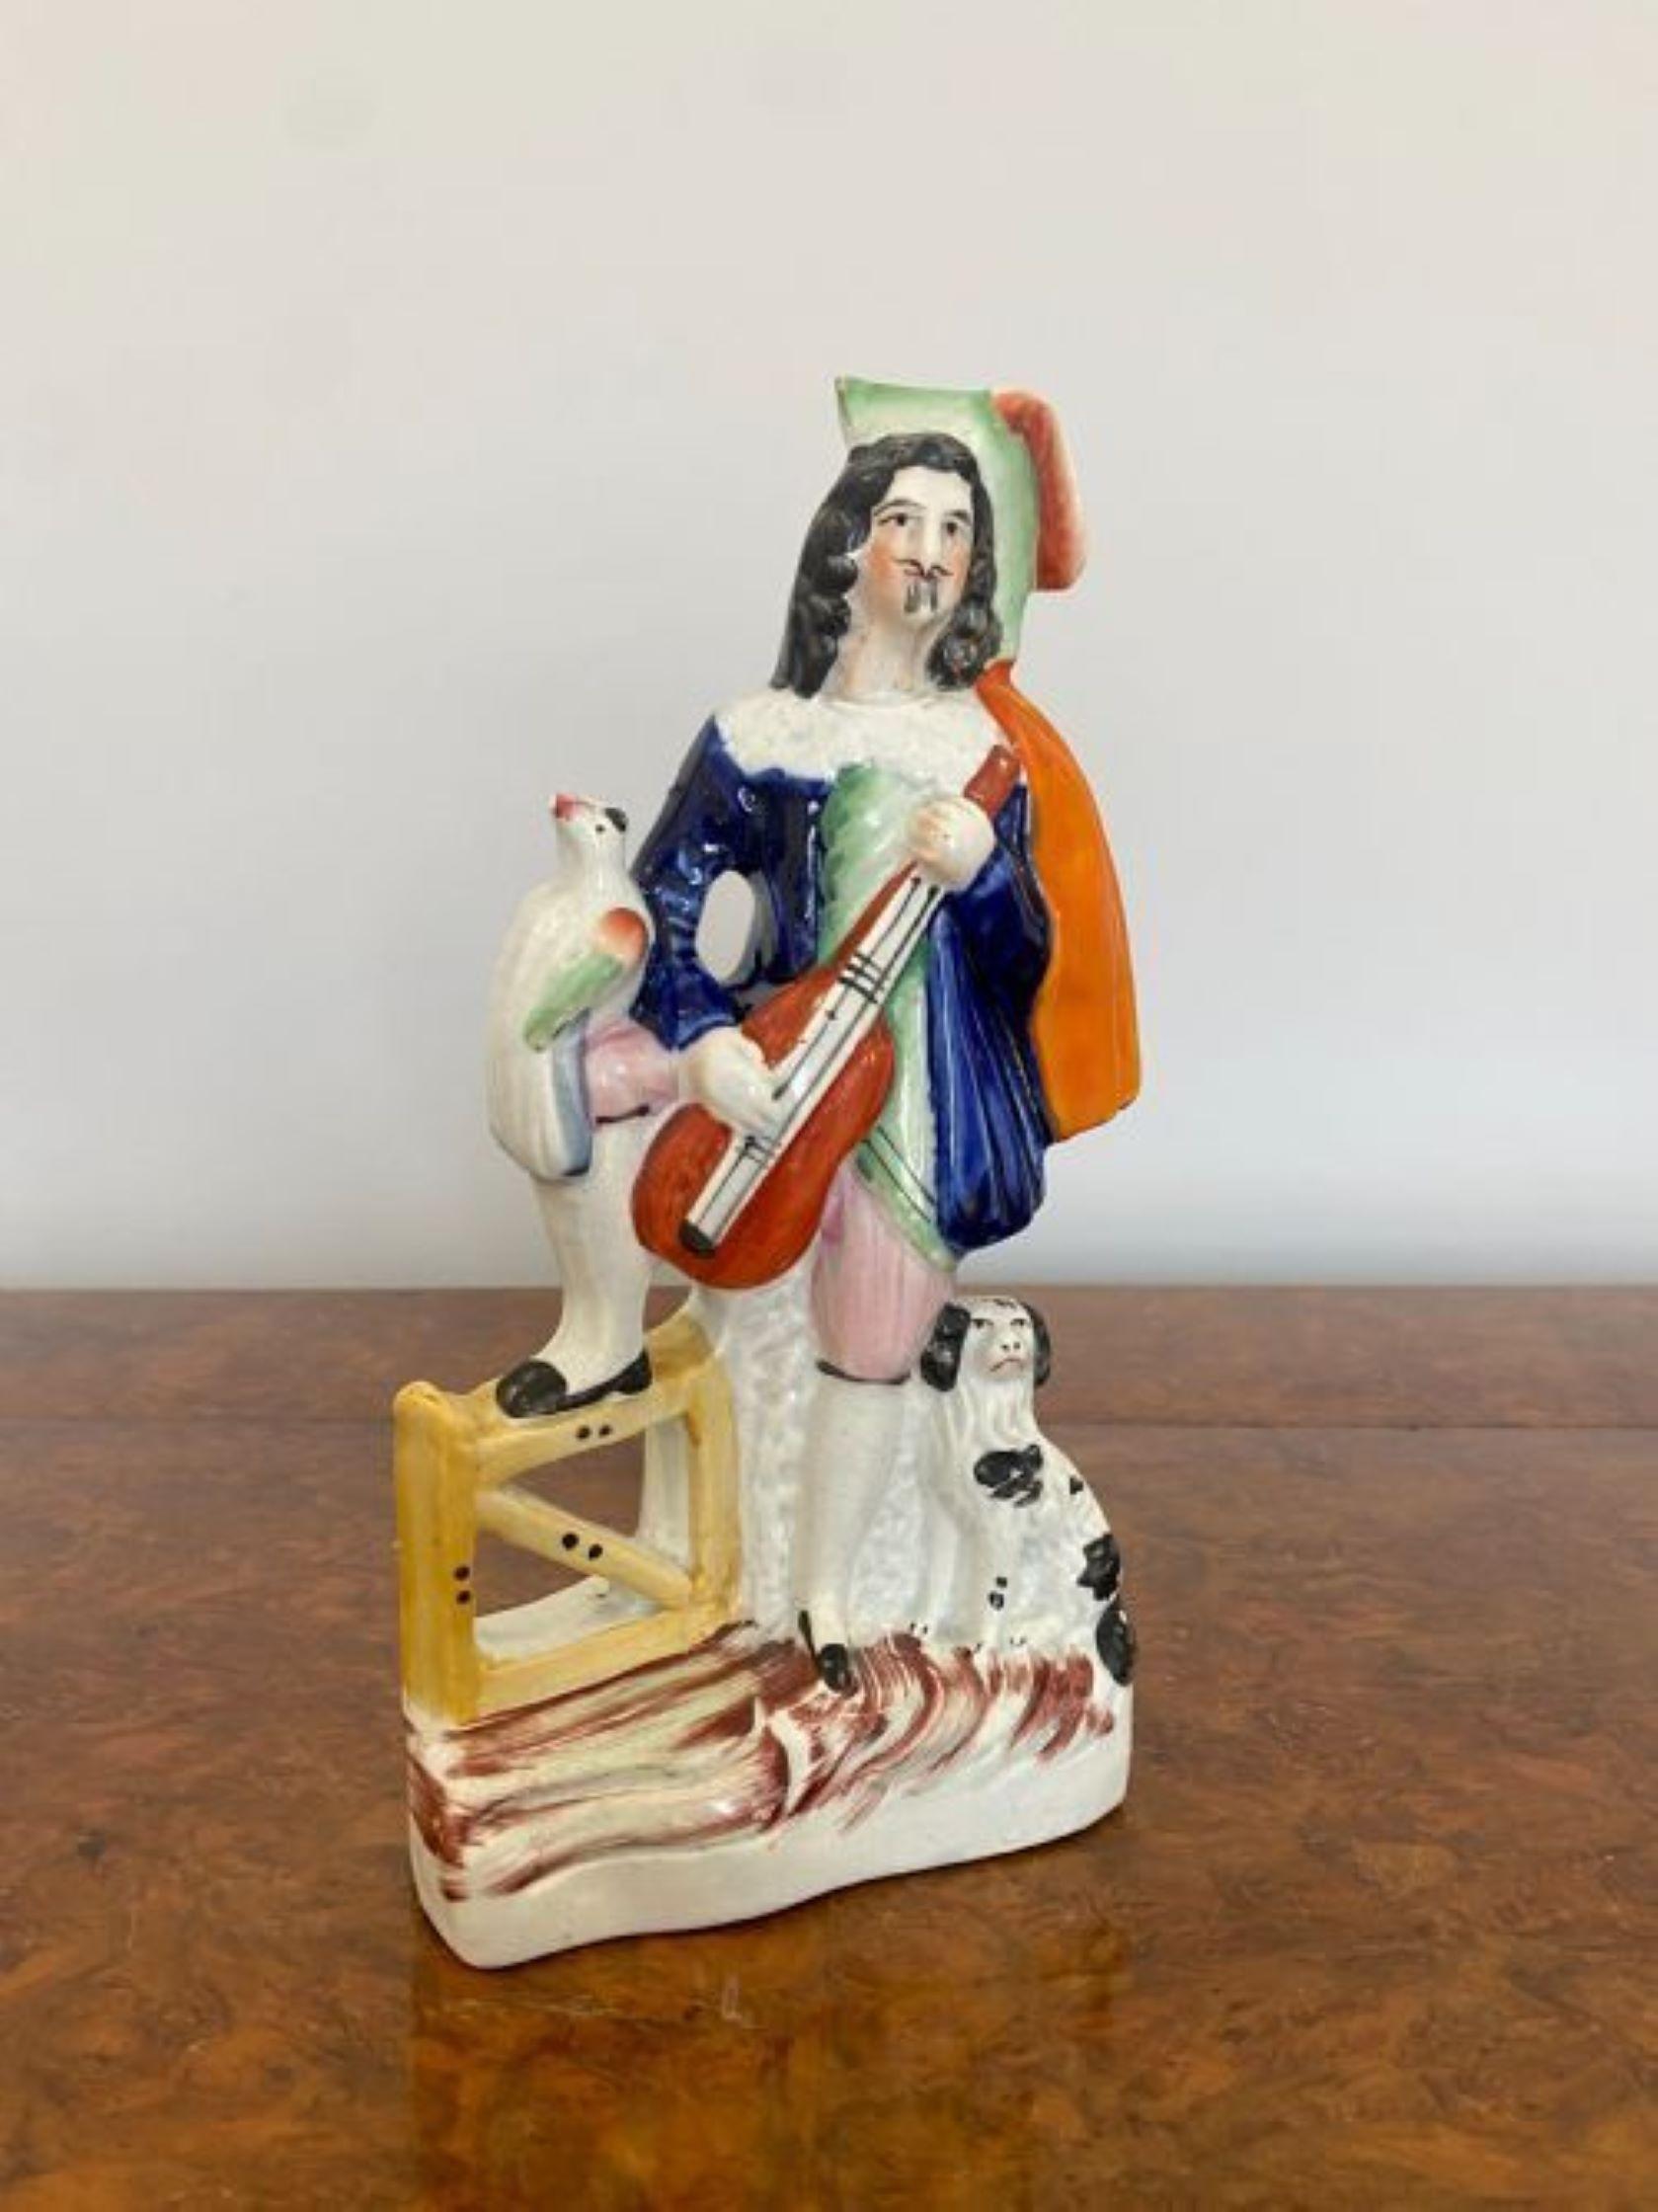 Unusual antique Victorian Staffordshire figure of a gentleman holding a musical instrument with his dog and bird by his side in wonderful period clothing in blue, red, green, black and white colours.